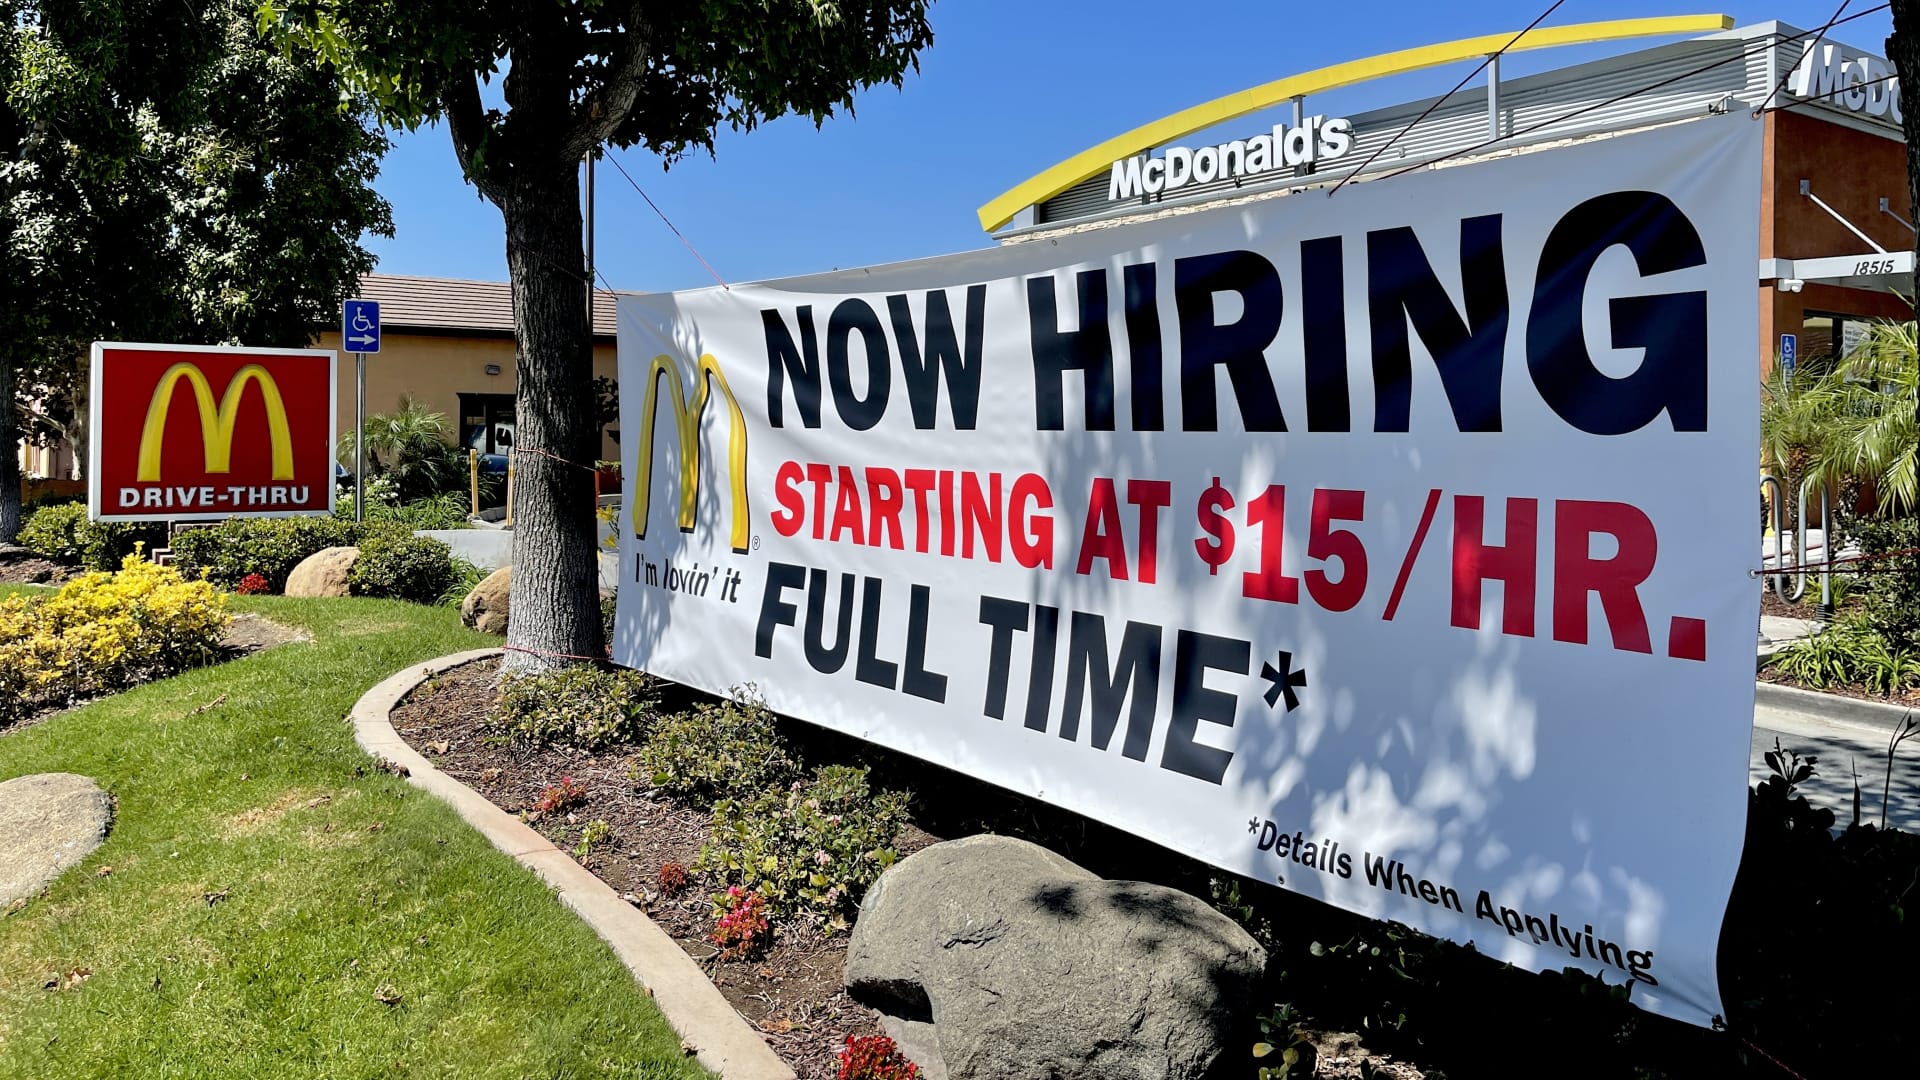 Private sector companies added 497,000 jobs in June, more than double expectations, ADP says